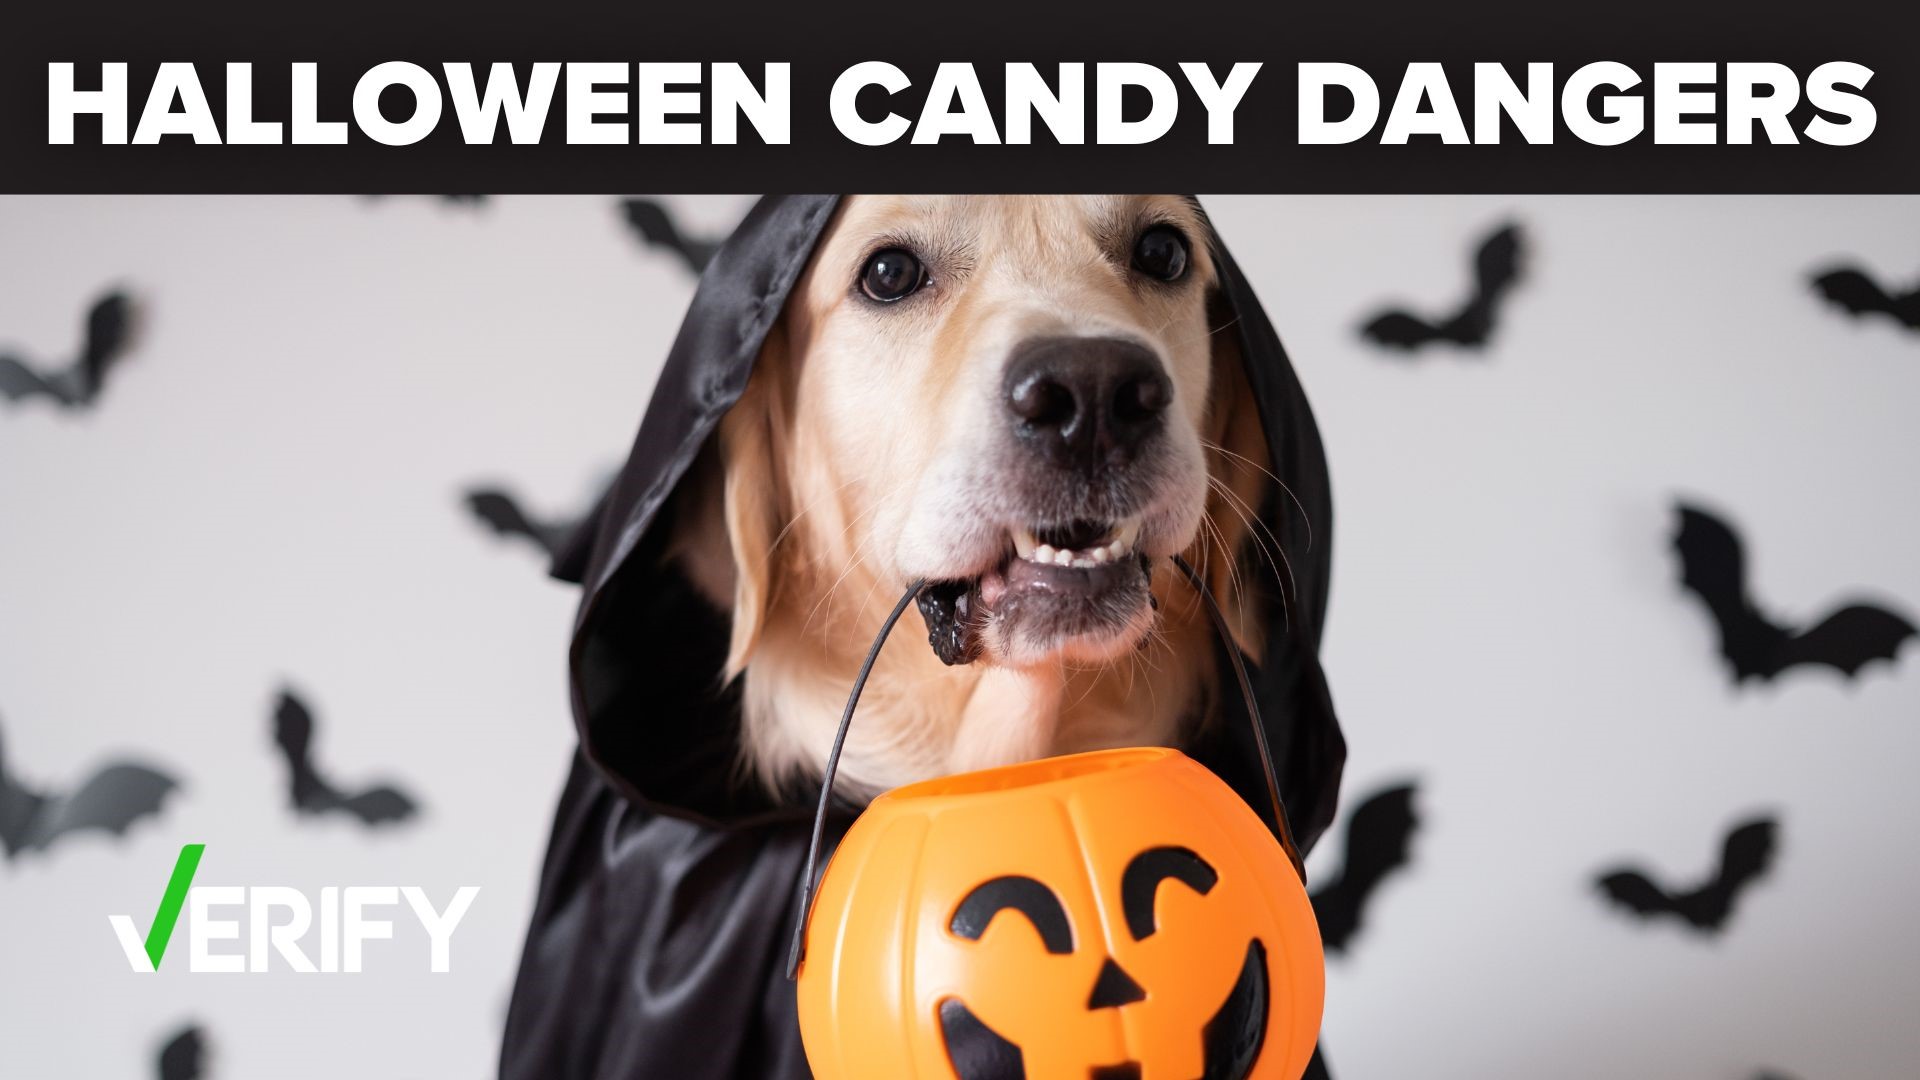 Halloween is coming up, and many families are gearing up for the big day. But there are some dangers when it comes to your pets.